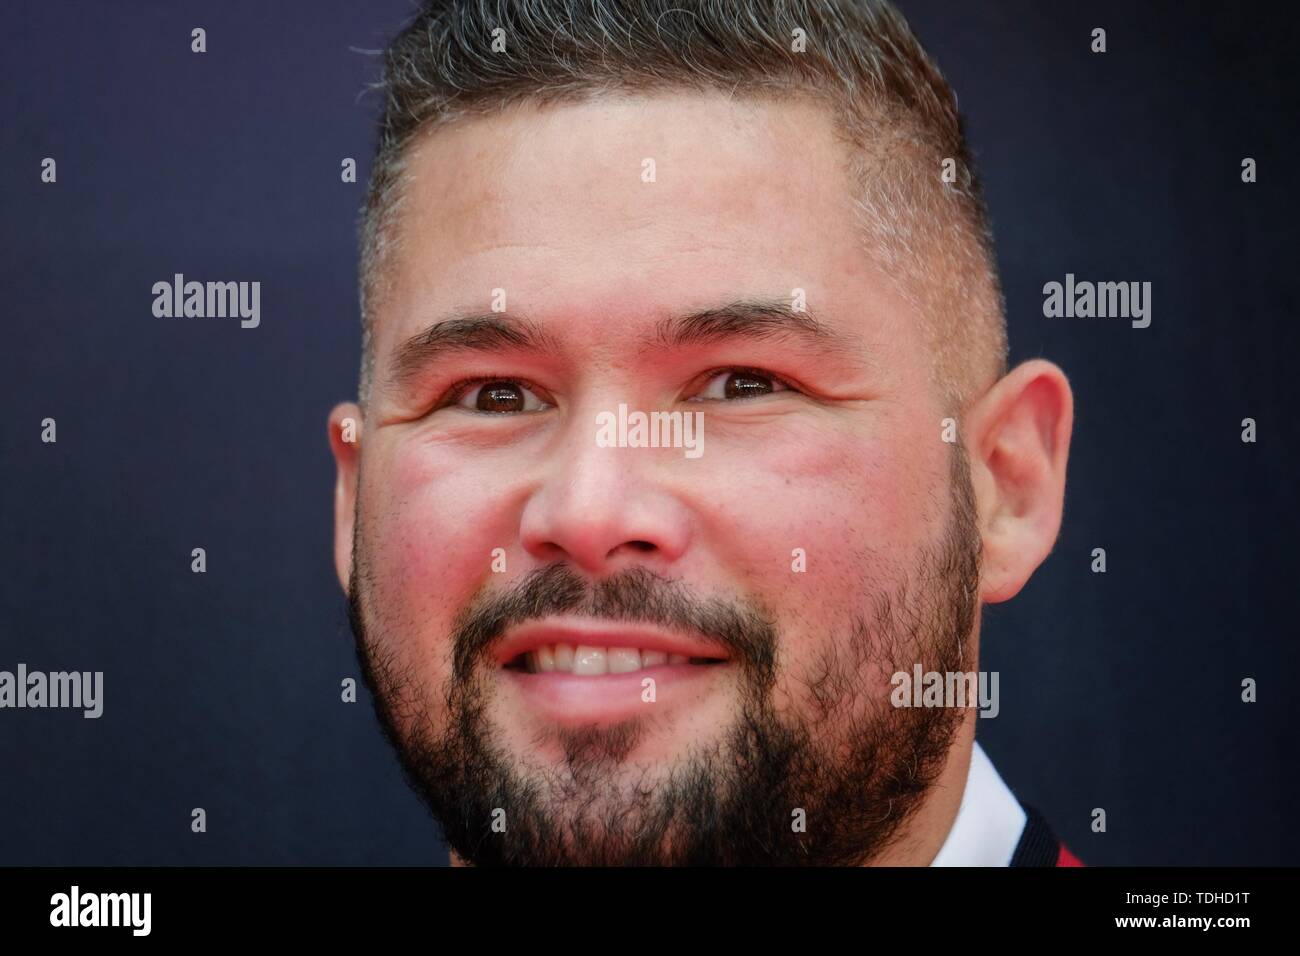 London, UK. 16th June 2019. Boxer Tony Bellew poses on the red carpet for the European premiere of Toy Story 4 held at the Odeon Luxe, Leicester Square, London on Sunday, Jun. 16, 2019 . Credit: Julie Edwards/Alamy Live News Stock Photo